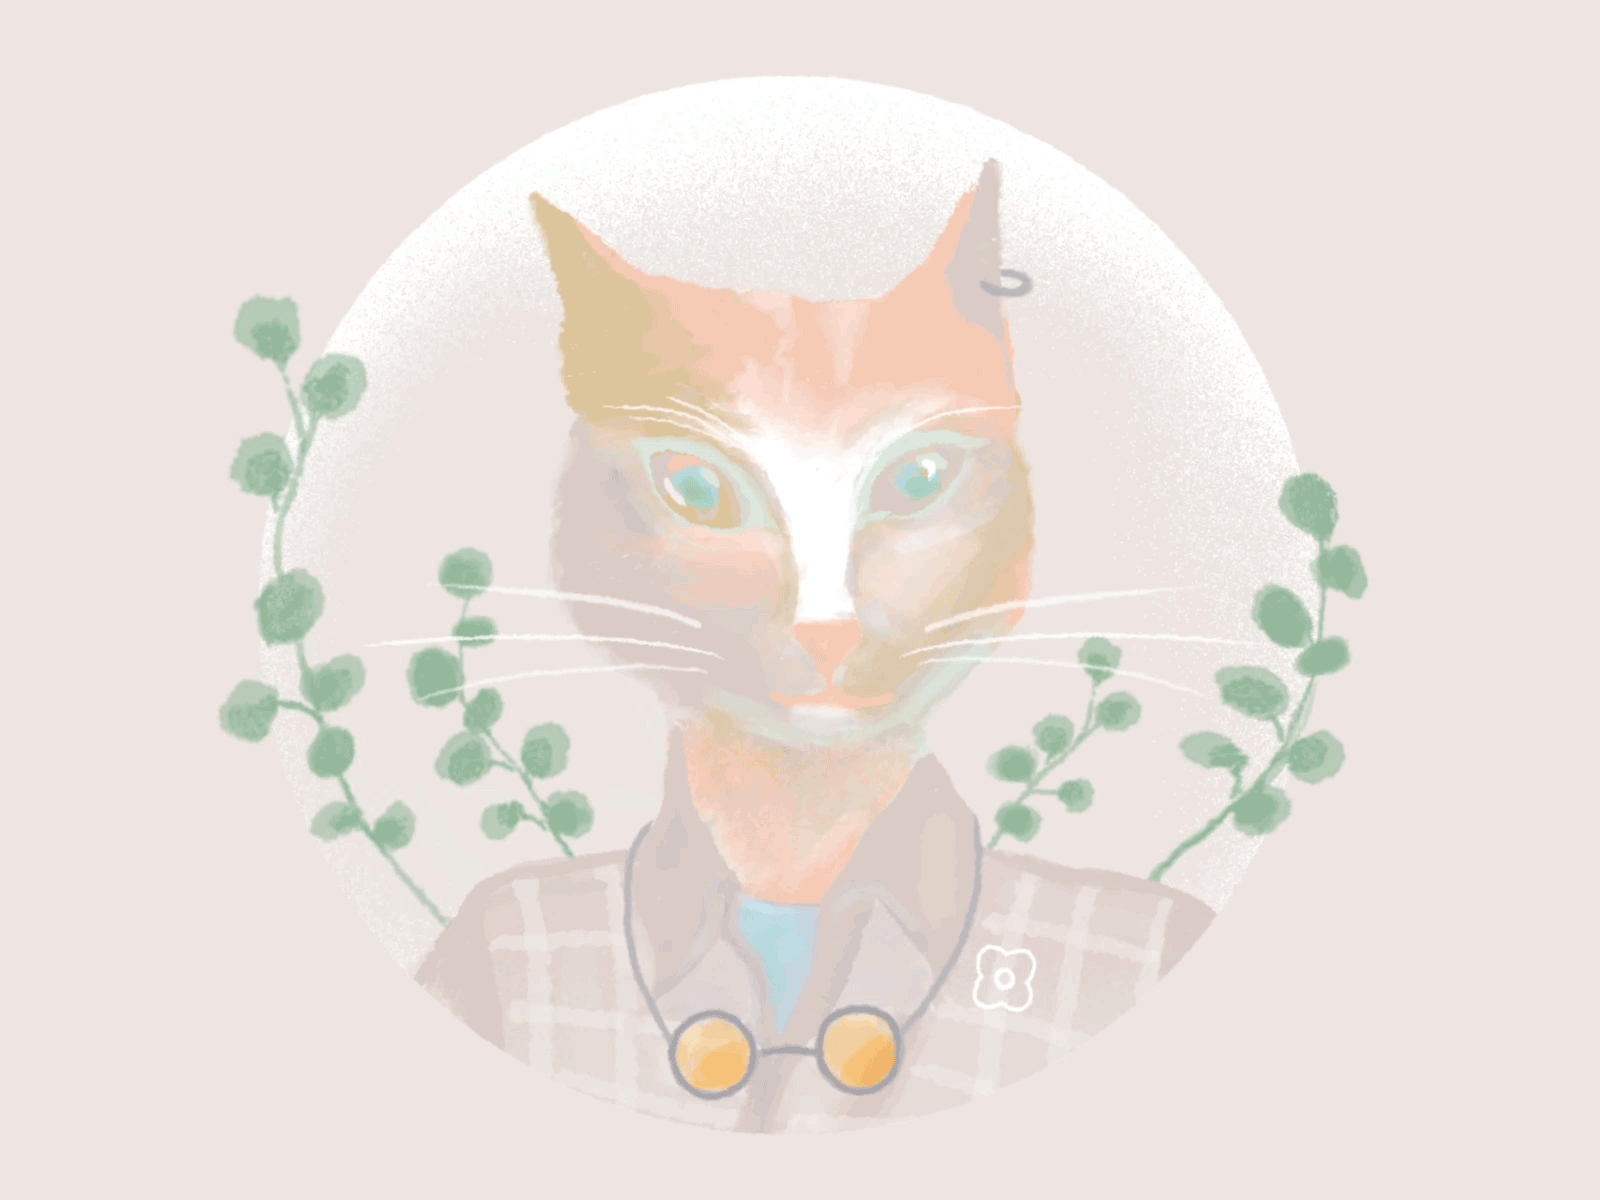 0-30 Daily Project 100practice animation cat classic cute digital drawing illustration loop motion graphic practice journey pastel color timeless